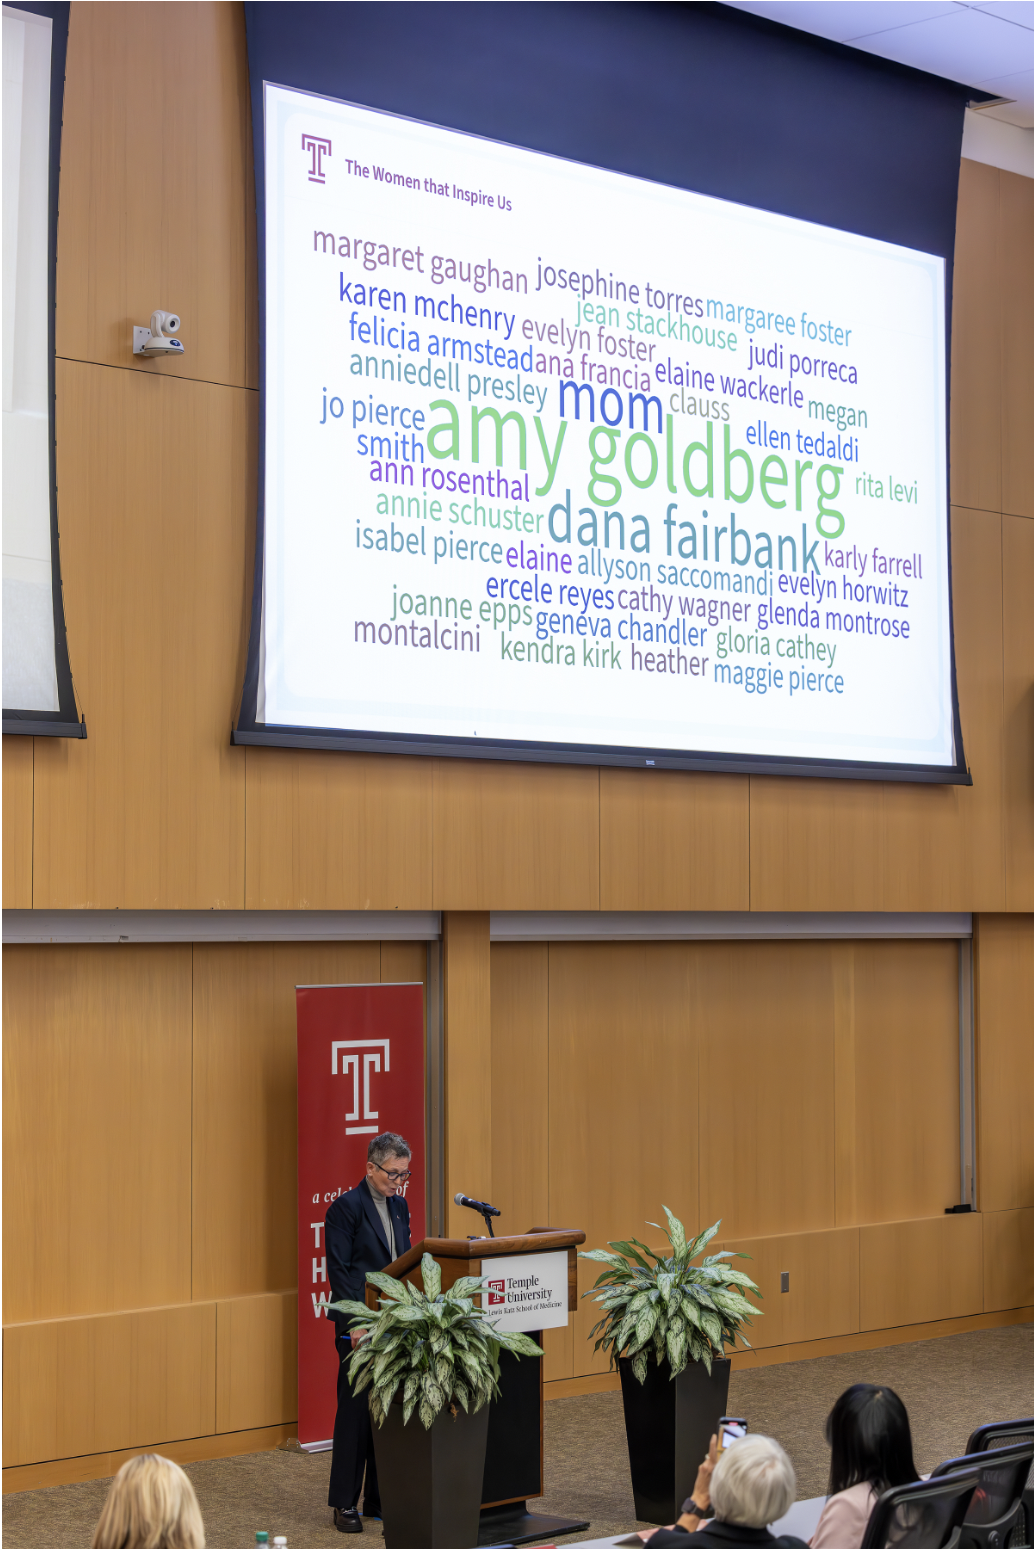 Dr. Amy Goldberg introduces the Temple Women Health event